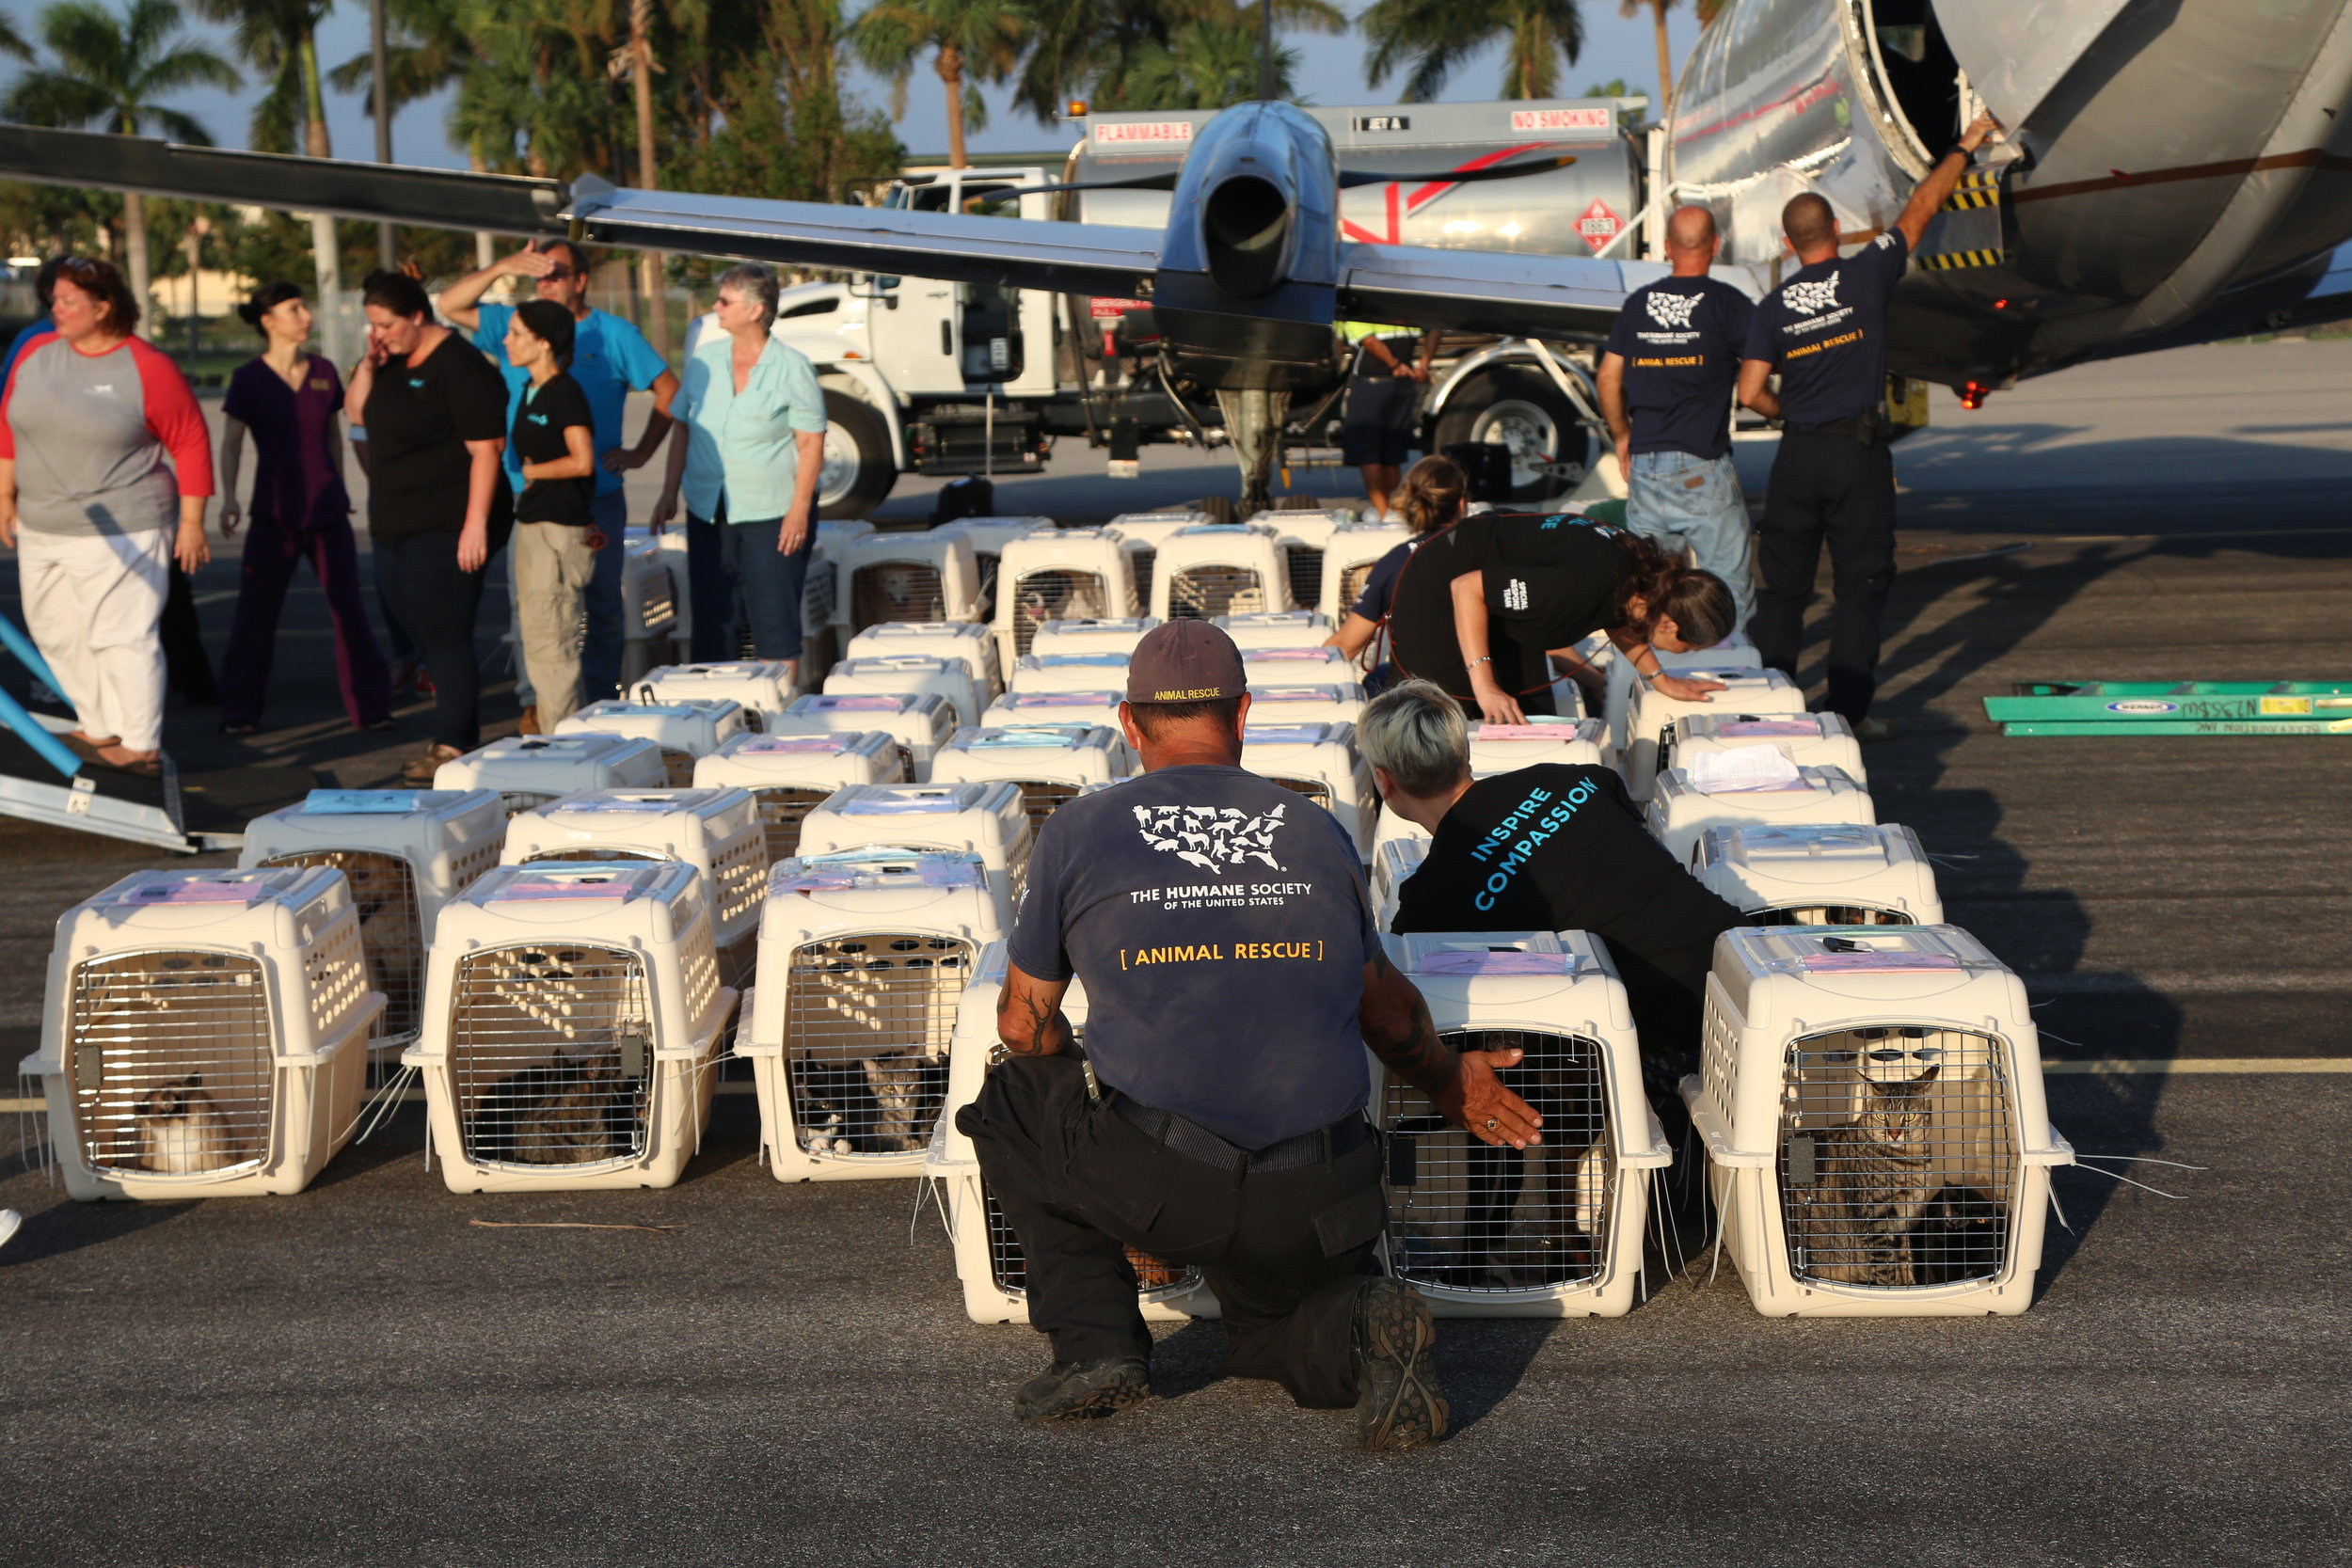  Some members of the Humane Society of the United States, the Humane Society of Naples and the Humane Society of San Diego comfort some of the 150 dogs and cats before they are loaded into a plane to be transported to San Diego for future adoption. T